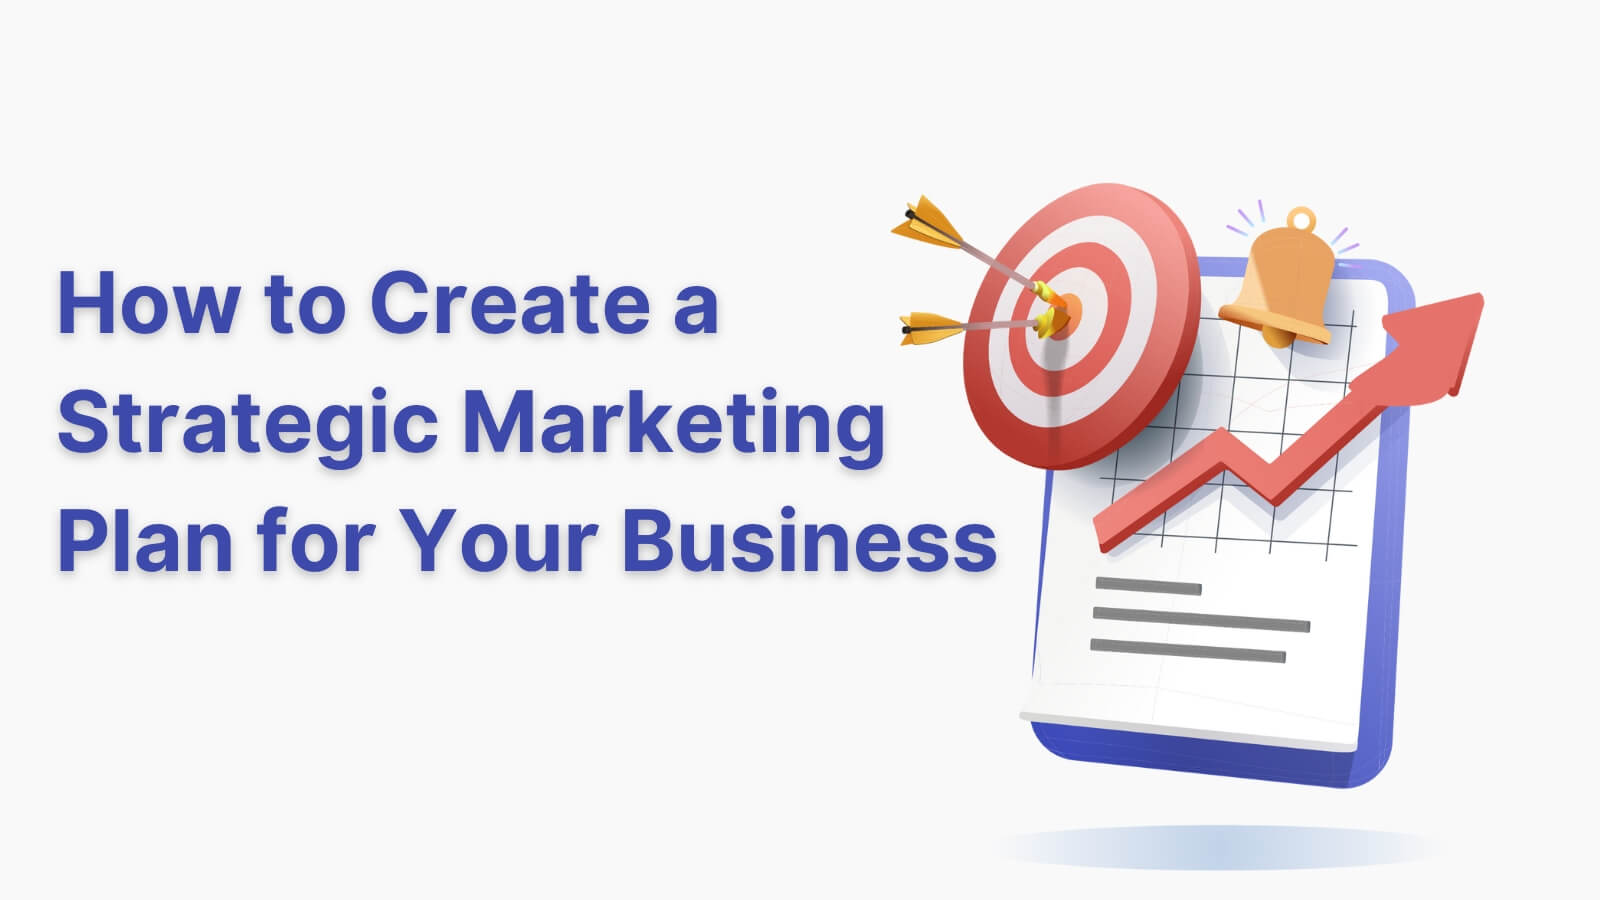 How to Create a Strategic Marketing Plan for Your Business